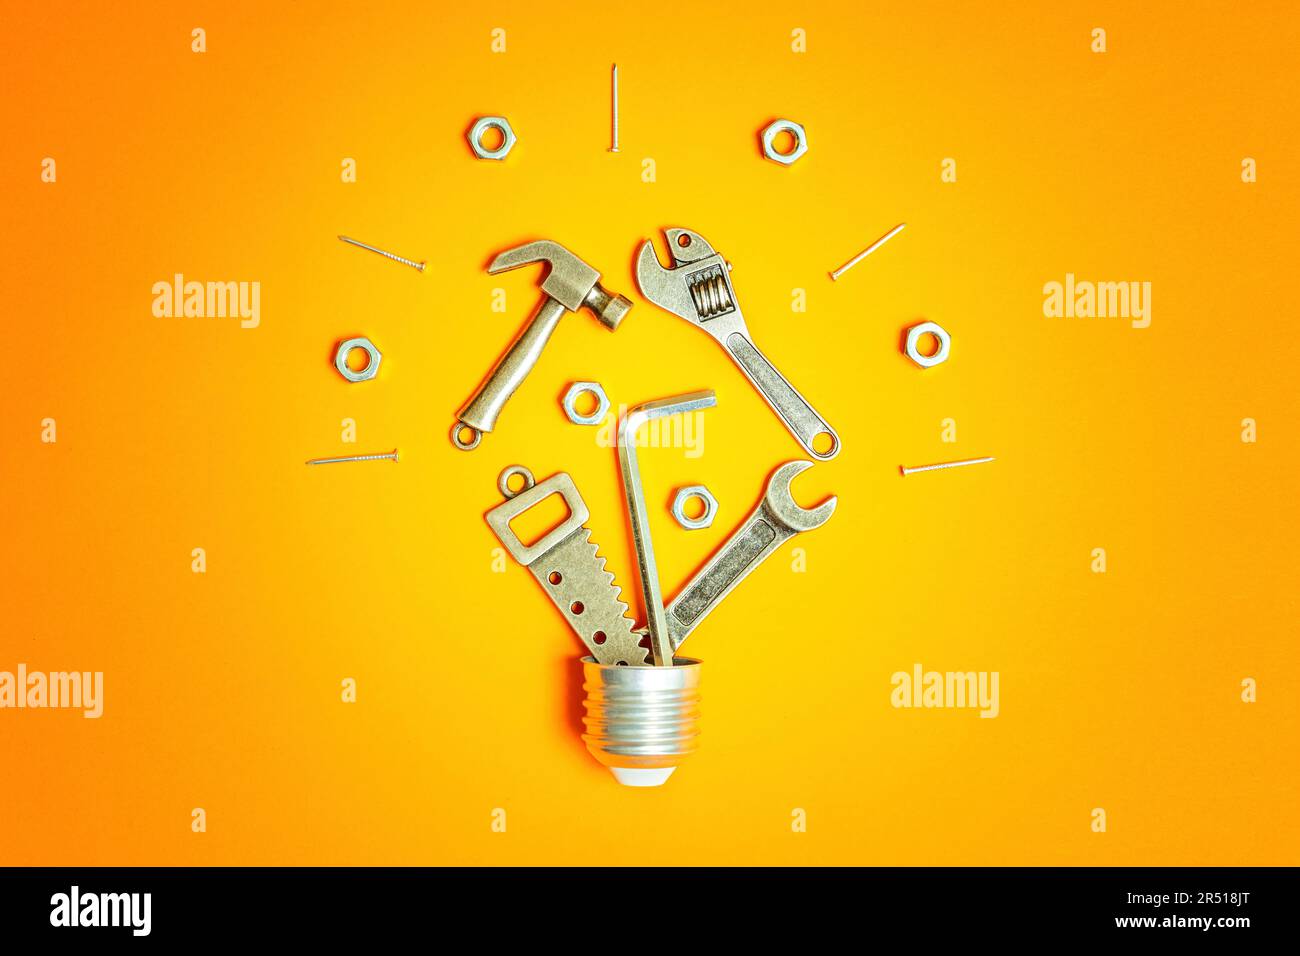 Lightbulb symbol made from tiny steel replicas of various hand tools and fasteners, all arranged on a vibrant orange background. Construction, enginee Stock Photo